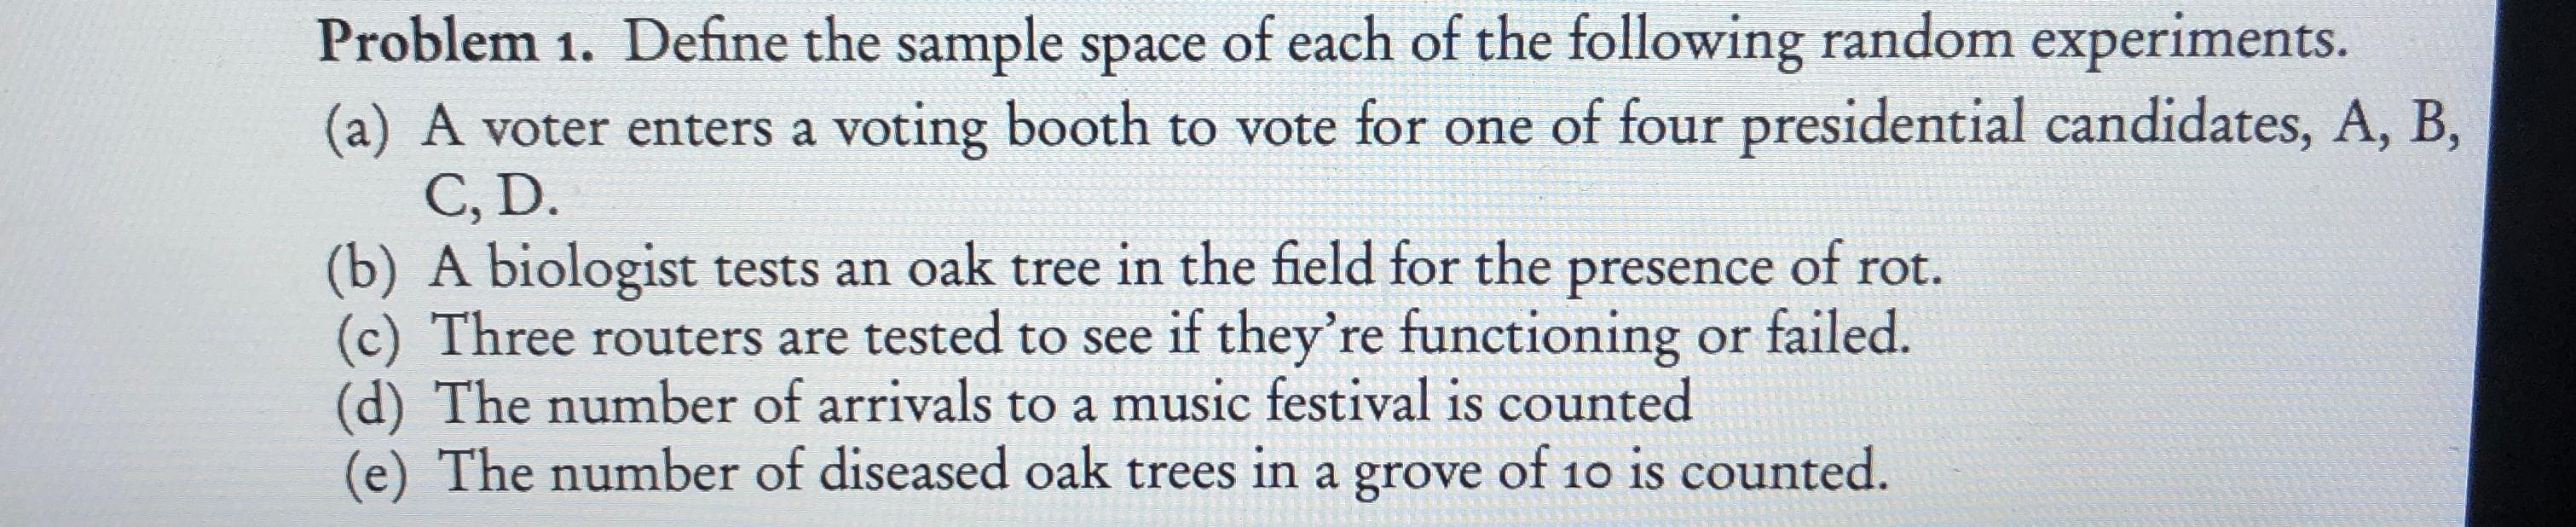 Problem 1. Define the sample space of each of the following random experiments.
(a) A voter enters a voting booth to vote for one of four presidential candidates, A, B,
C, D.
(b) A biologist tests an oak tree in the field for the presence of rot.
Three routers are tested to see if they're functioning or failed
(d) The number of arrivals to a music festival is counted
(e) The number of diseased oak trees in a grove of 10 is counted.
